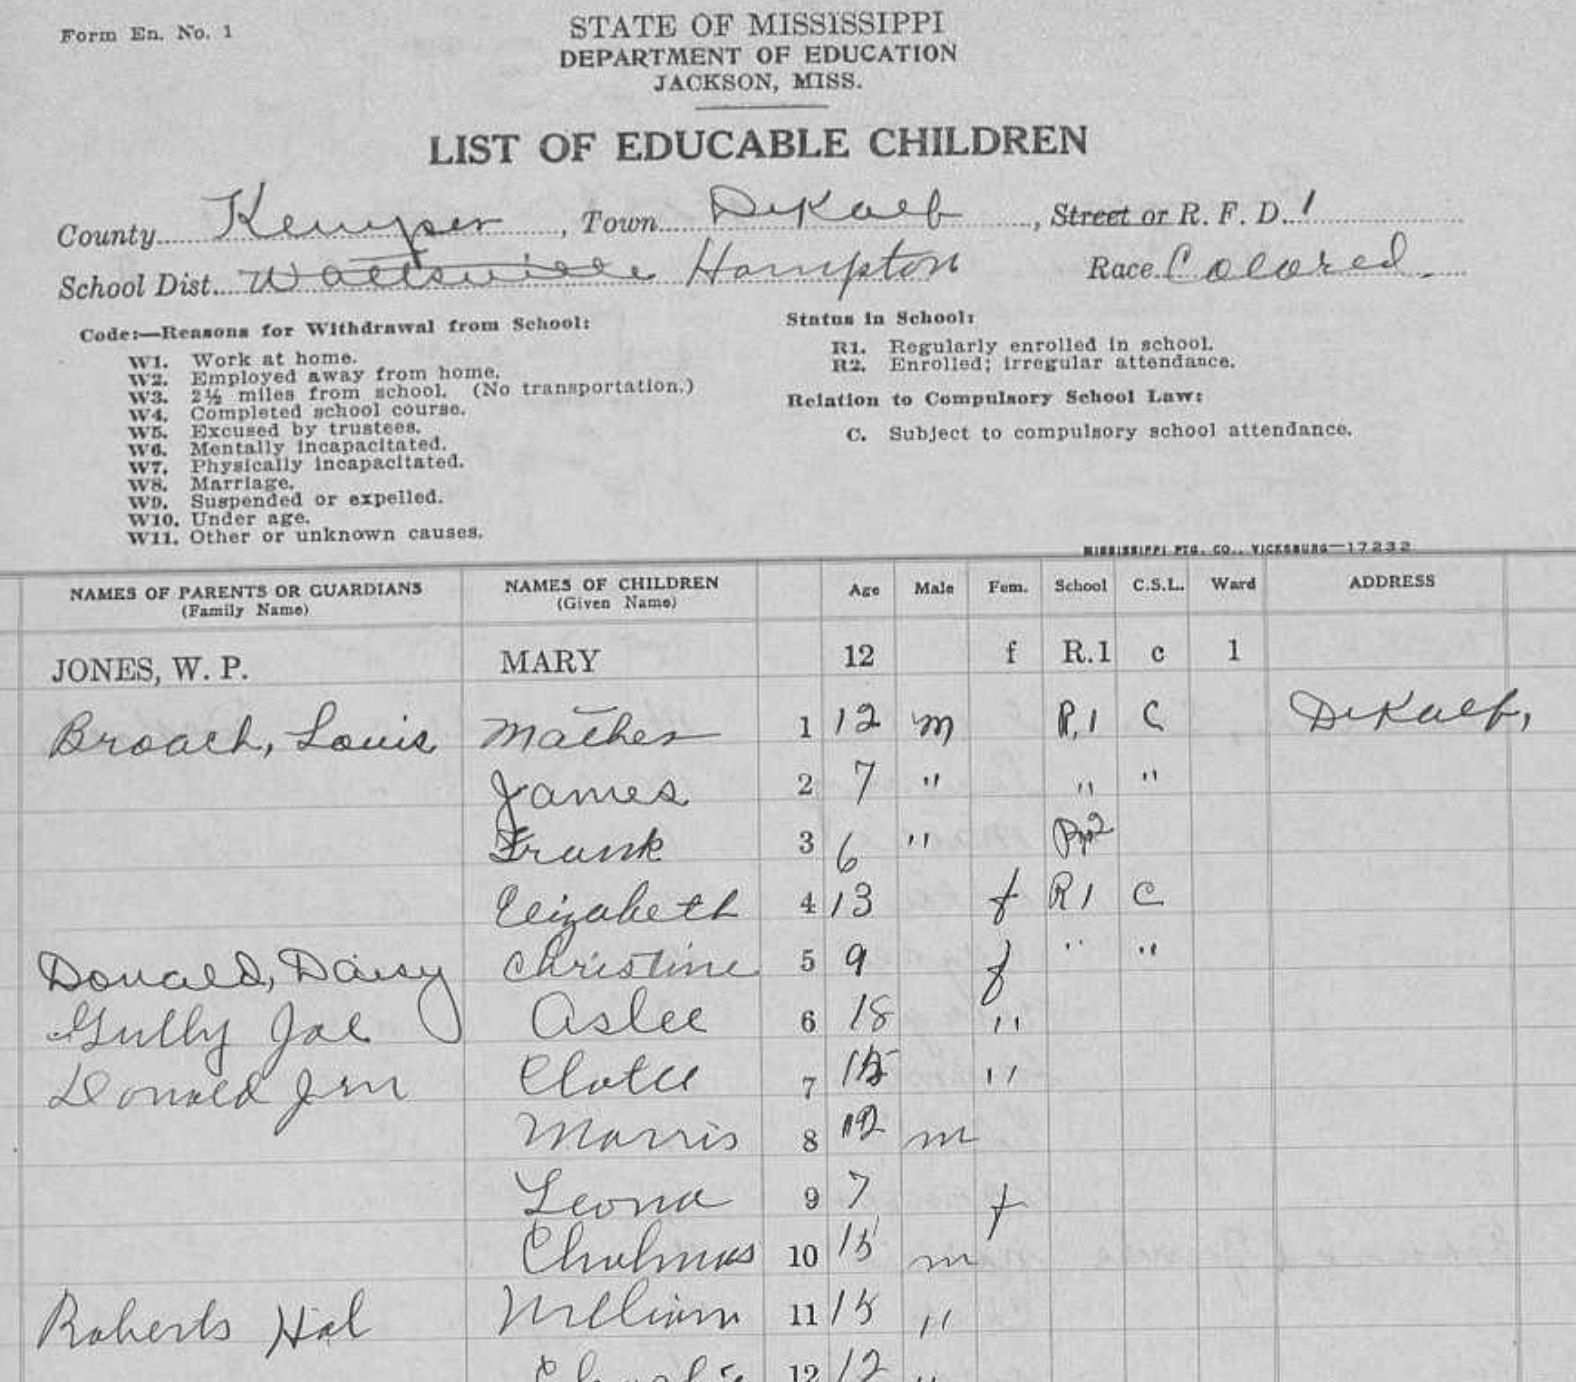 Hal Roberts listing 1927. William and Charlie may be his brothers if a Calvin listed in the census is his father. (Speculative)